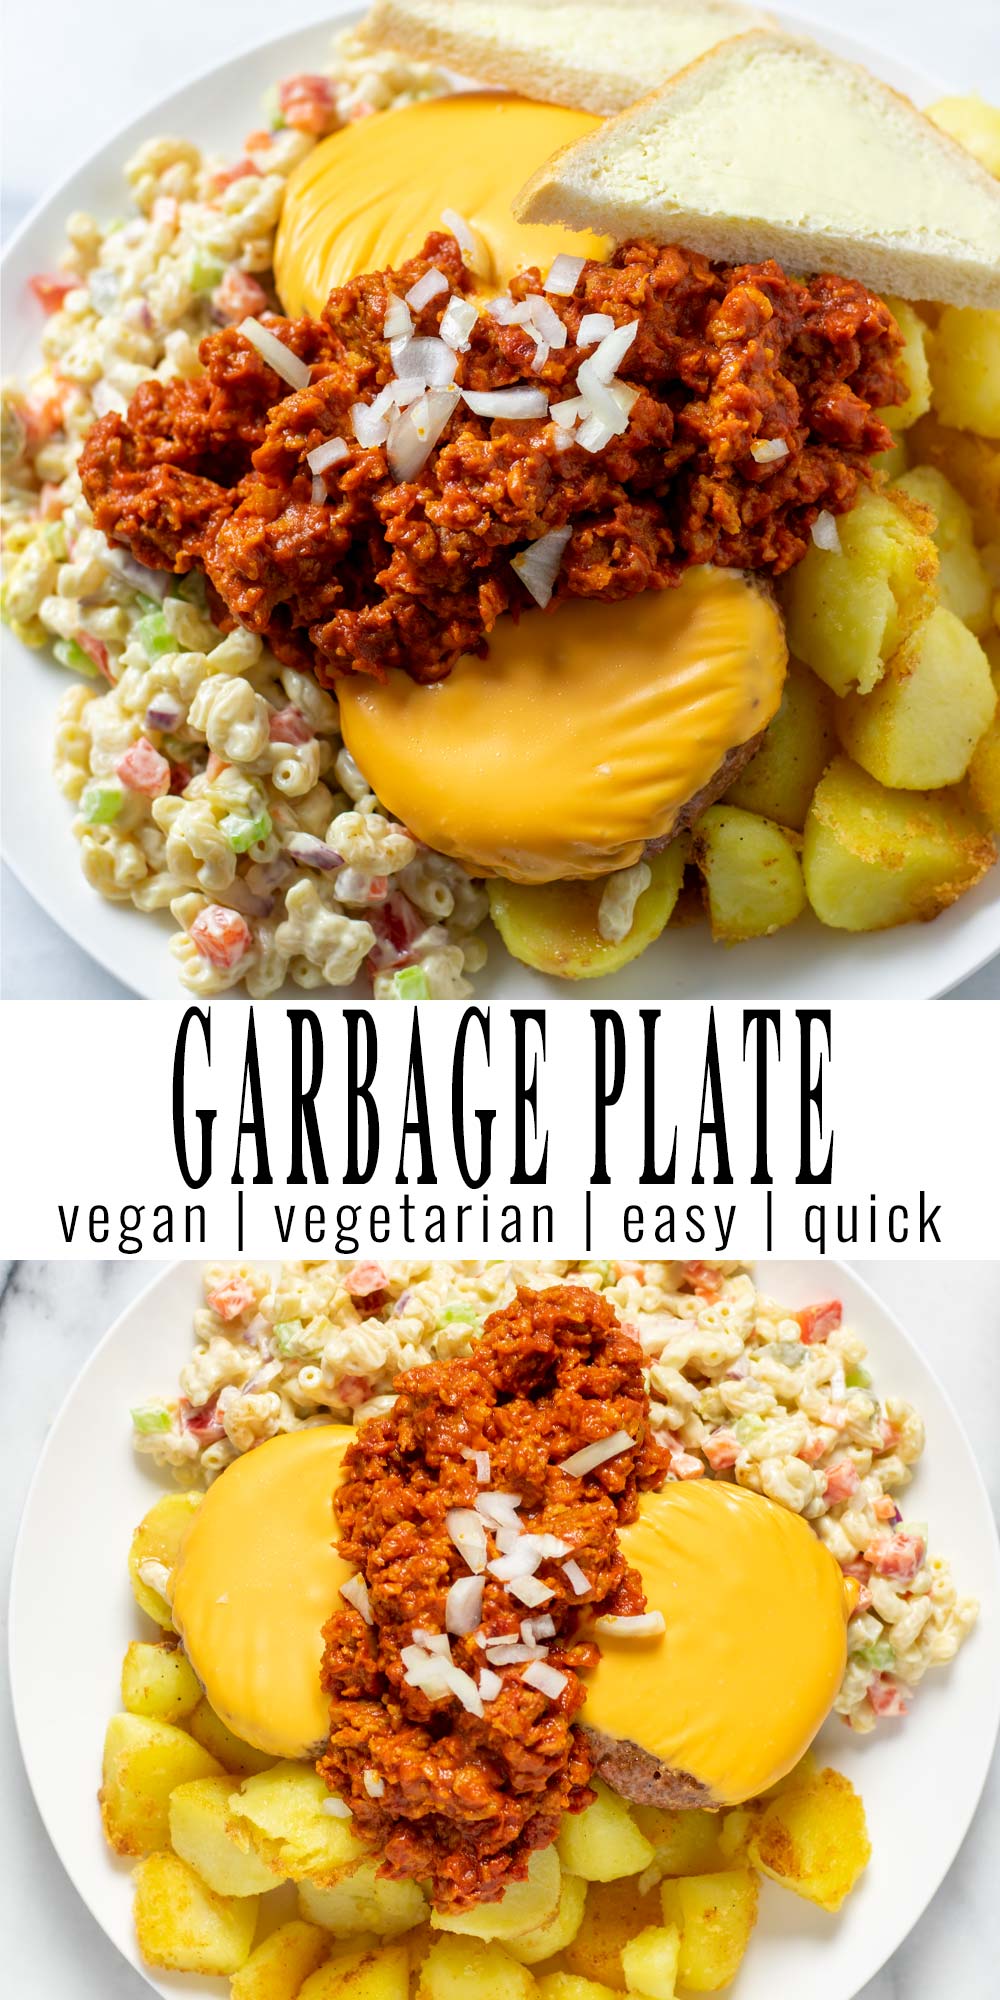 Collage of two pictures of the Garbage Plate with recipe title text.